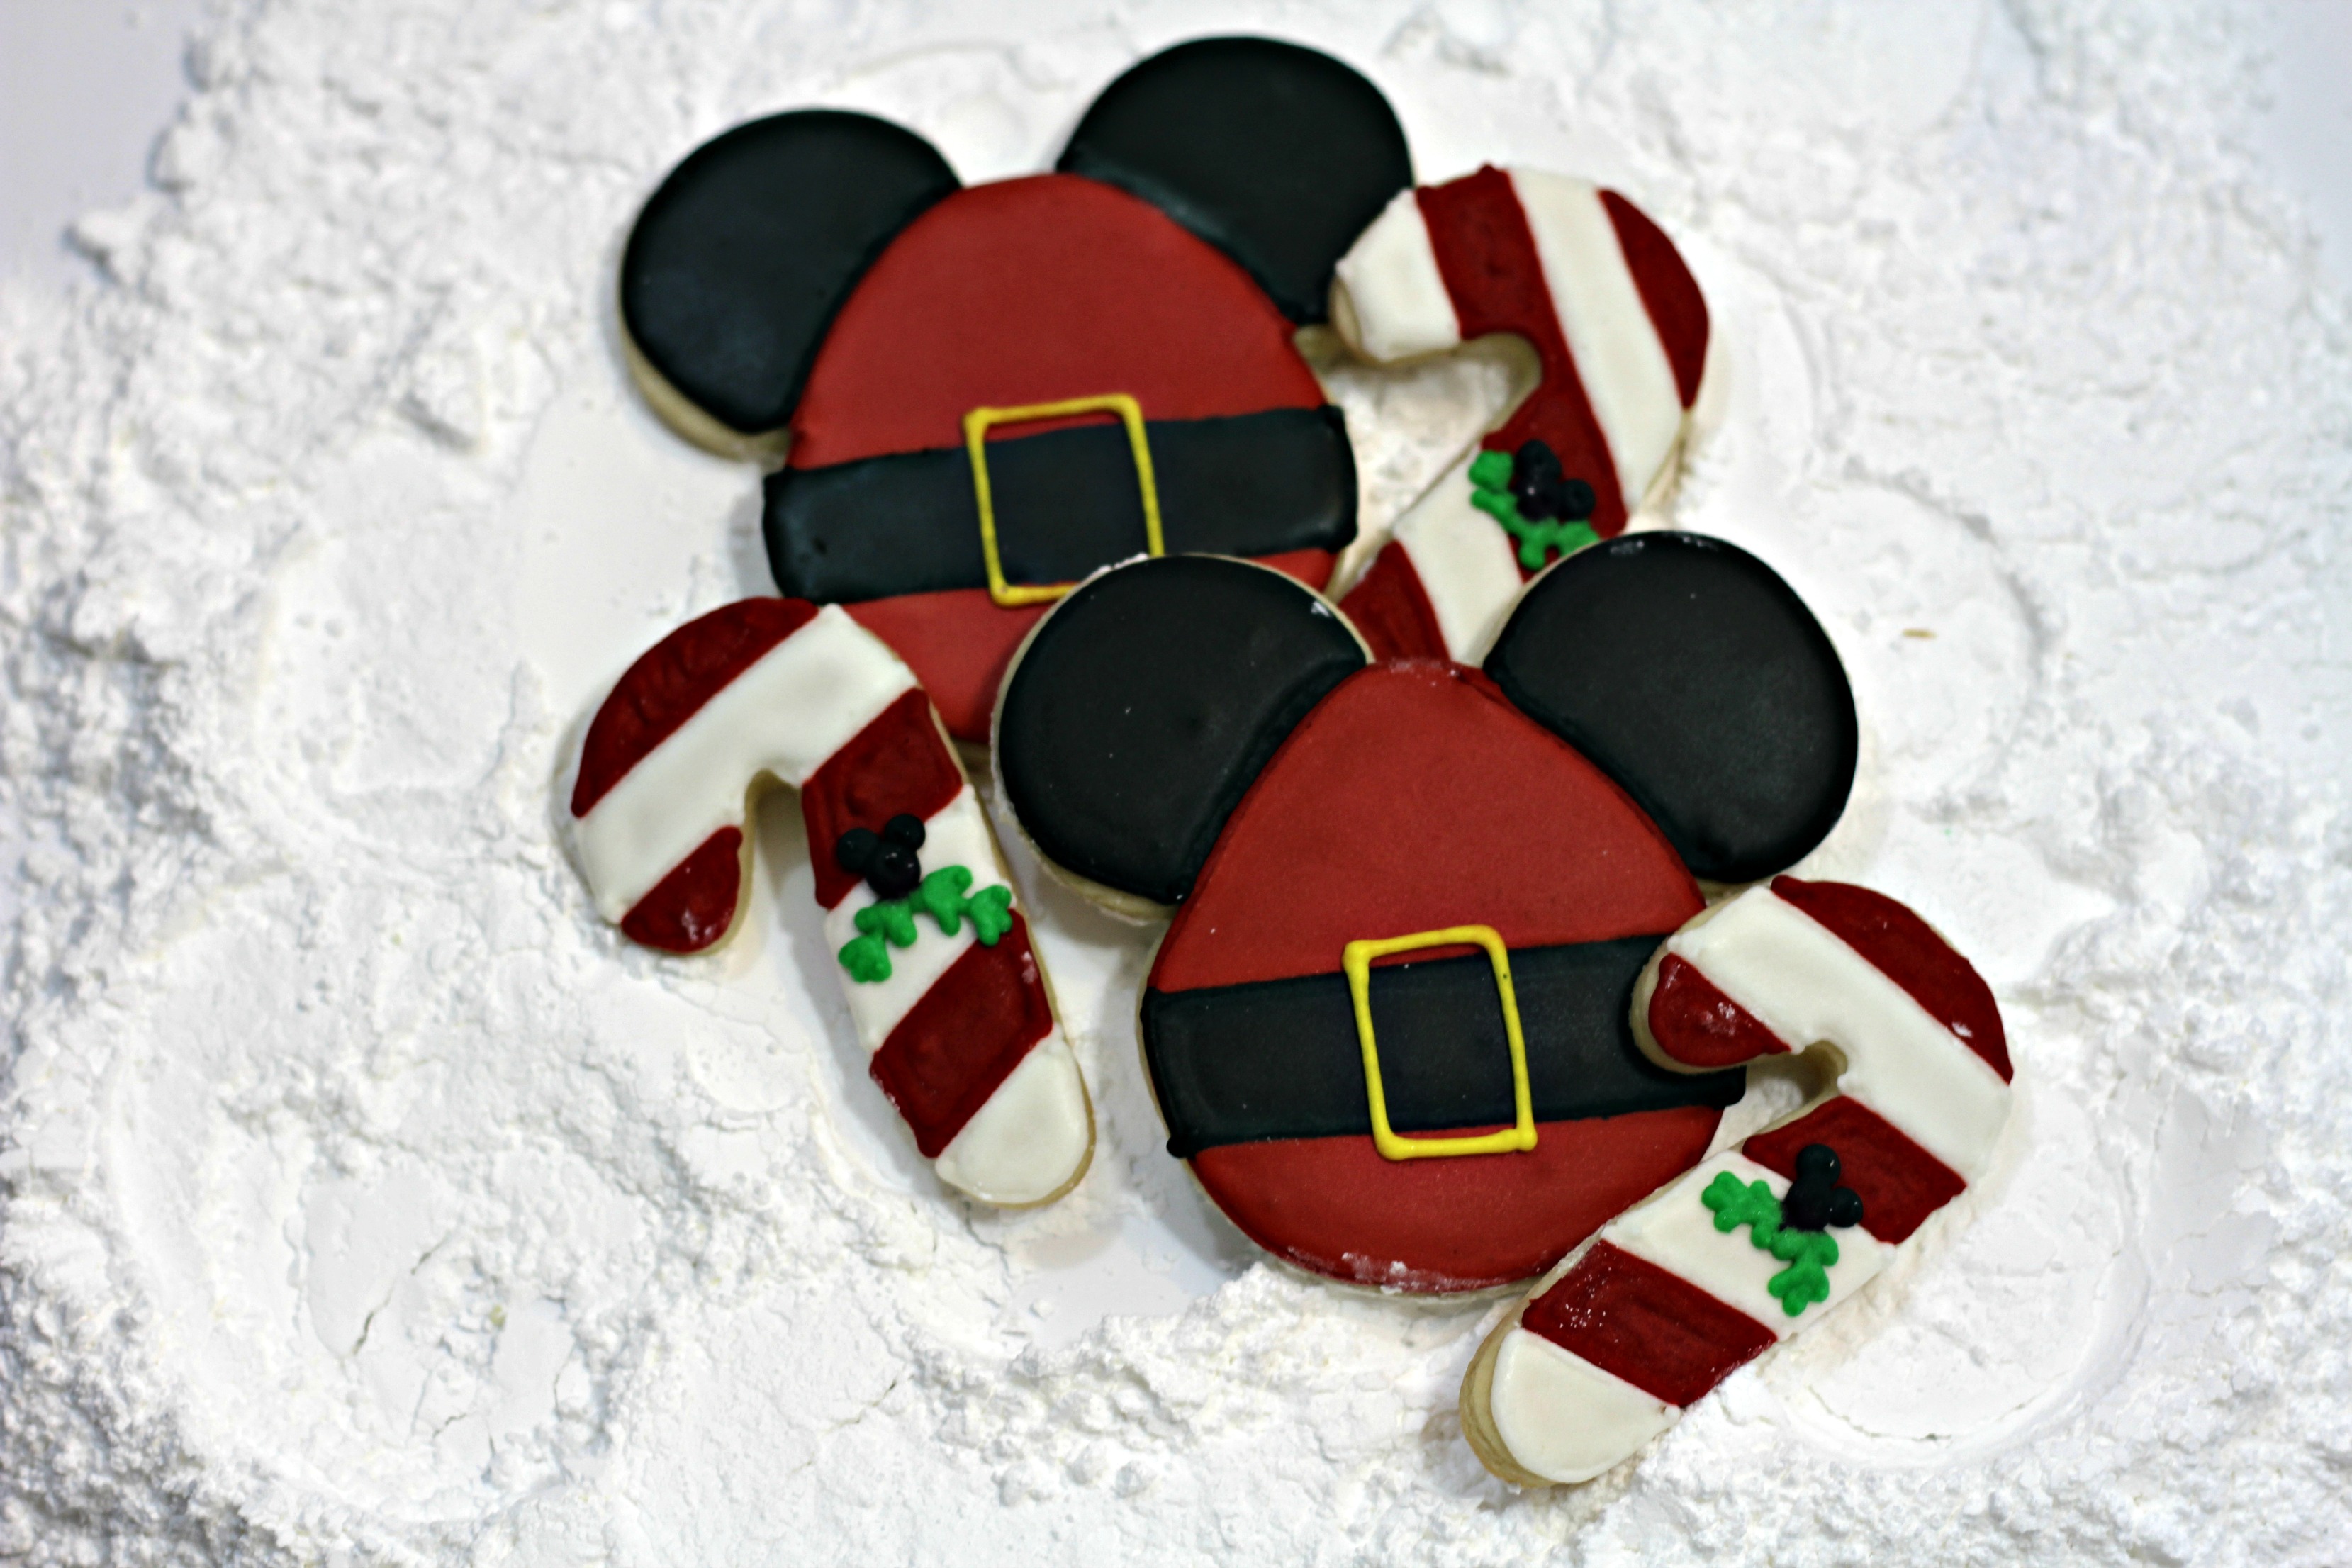 This recipe for Santa Mickey Sugar Cookies is perfect for a class party dessert! Get the kids to head to the kitchen with you to do some holiday baking! It's such a fun activity to do together.